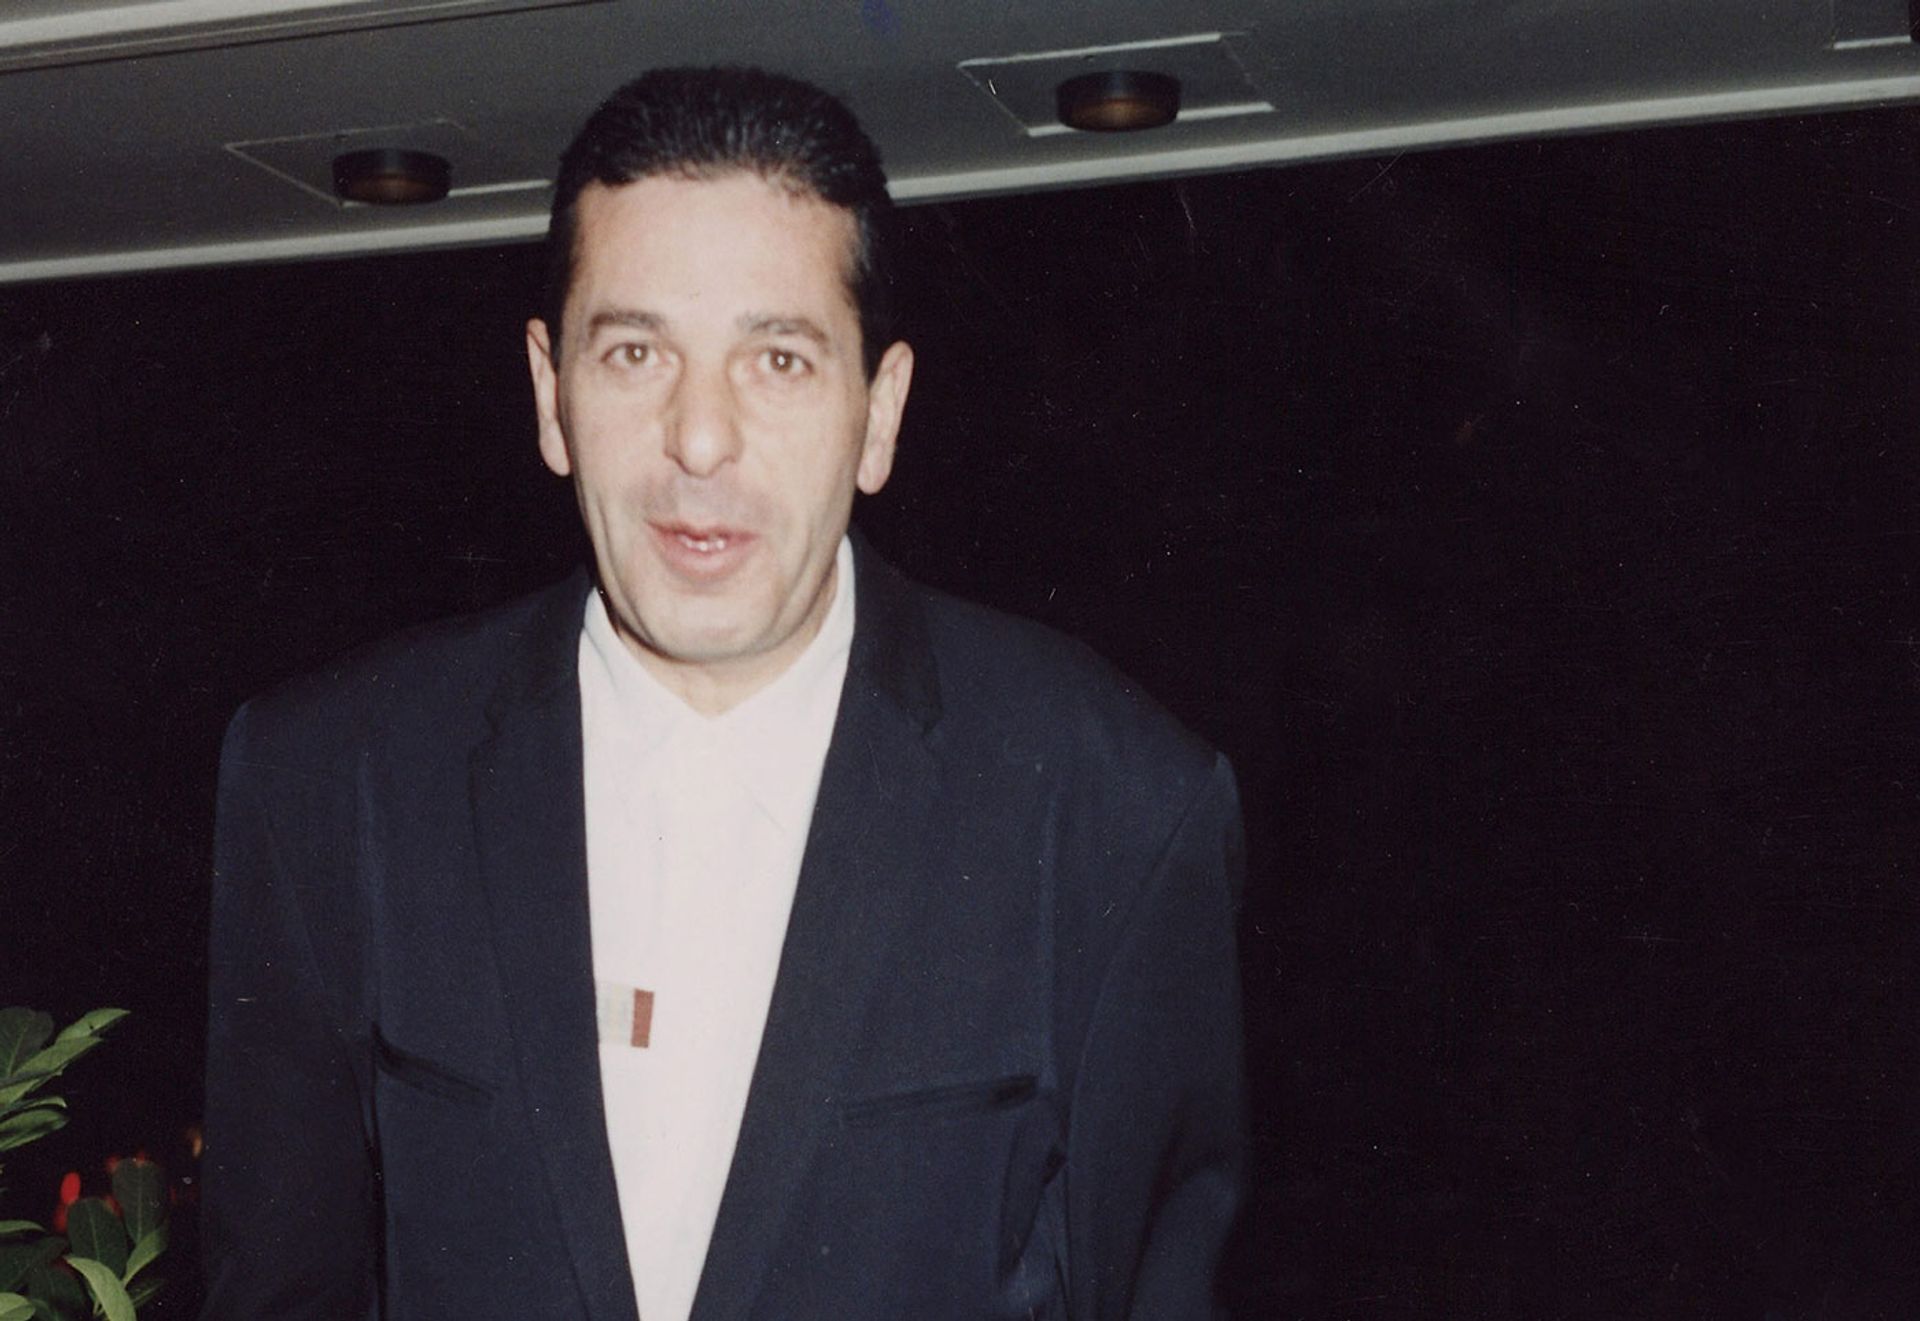 Charles Saatchi in 1997, the year that Sensation! lived up its name at the Royal Academy of Arts, in London Photo by Dave Benett/Getty Images